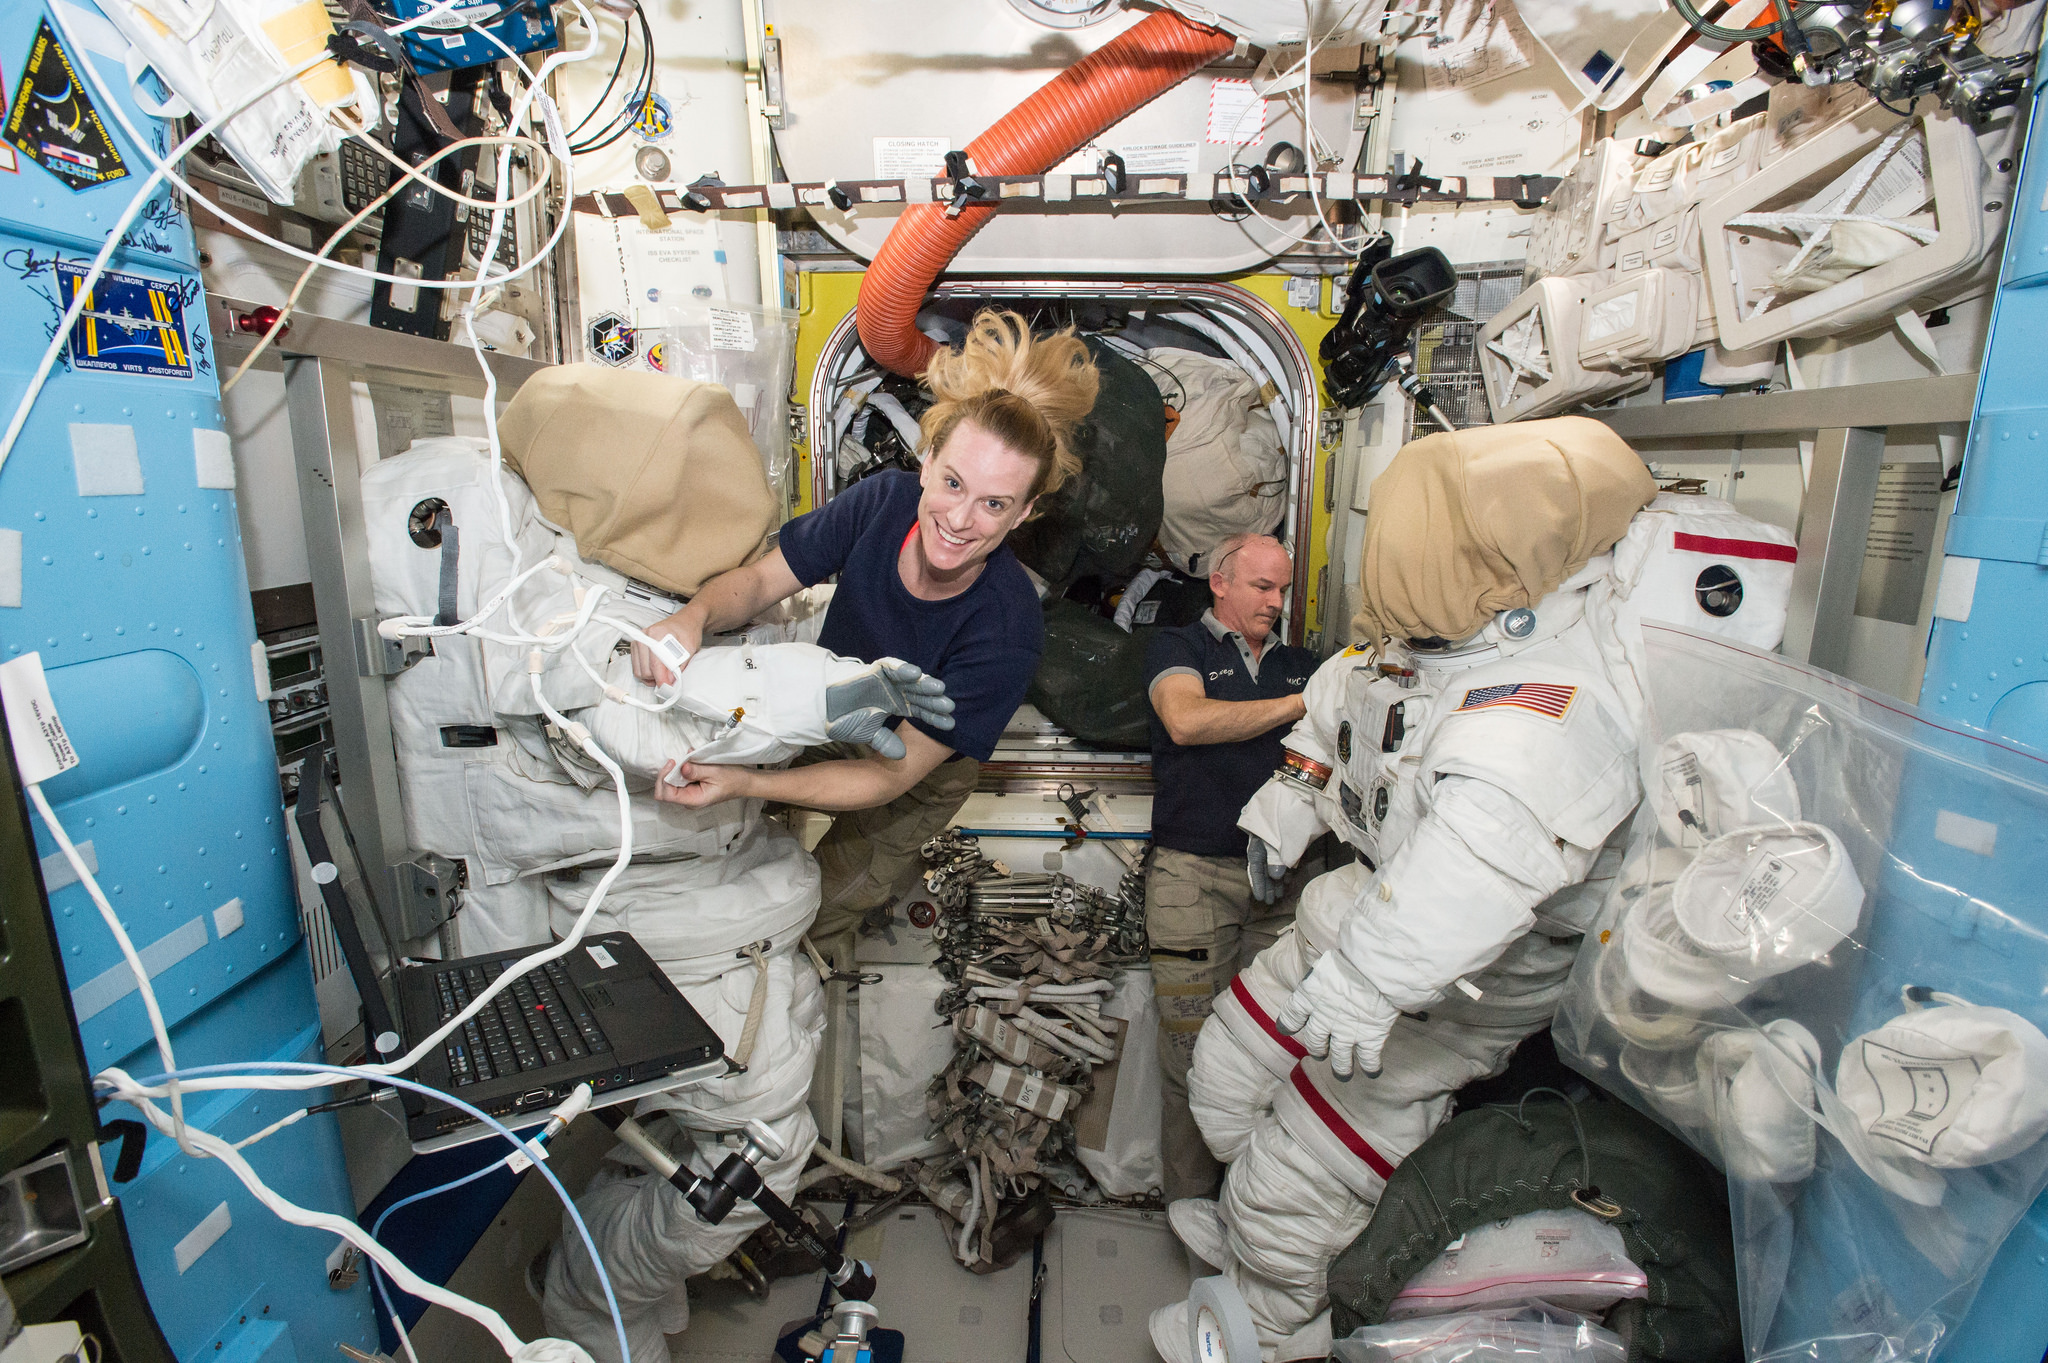 Expedition 48 Commander Jeff Williams and Flight Engineer Kate Rubins work with their Extravehicular Mobility Unit (EMU) suits in the Quest airlock. Photo Credit: NASA